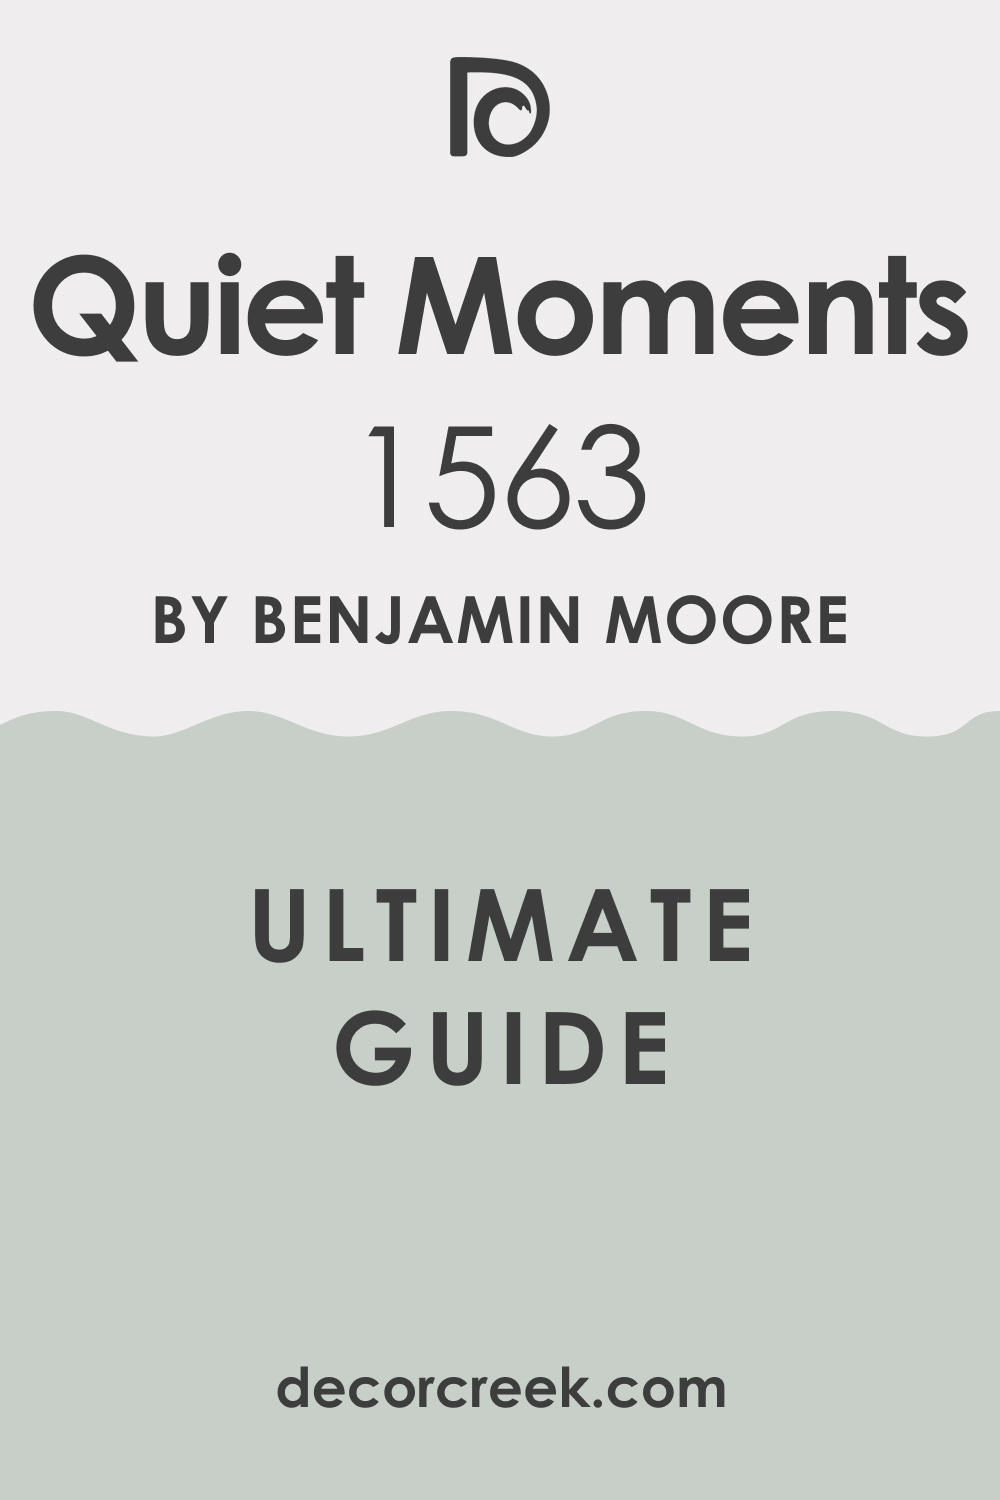 Ultimate Guide of BM Quiet Moments